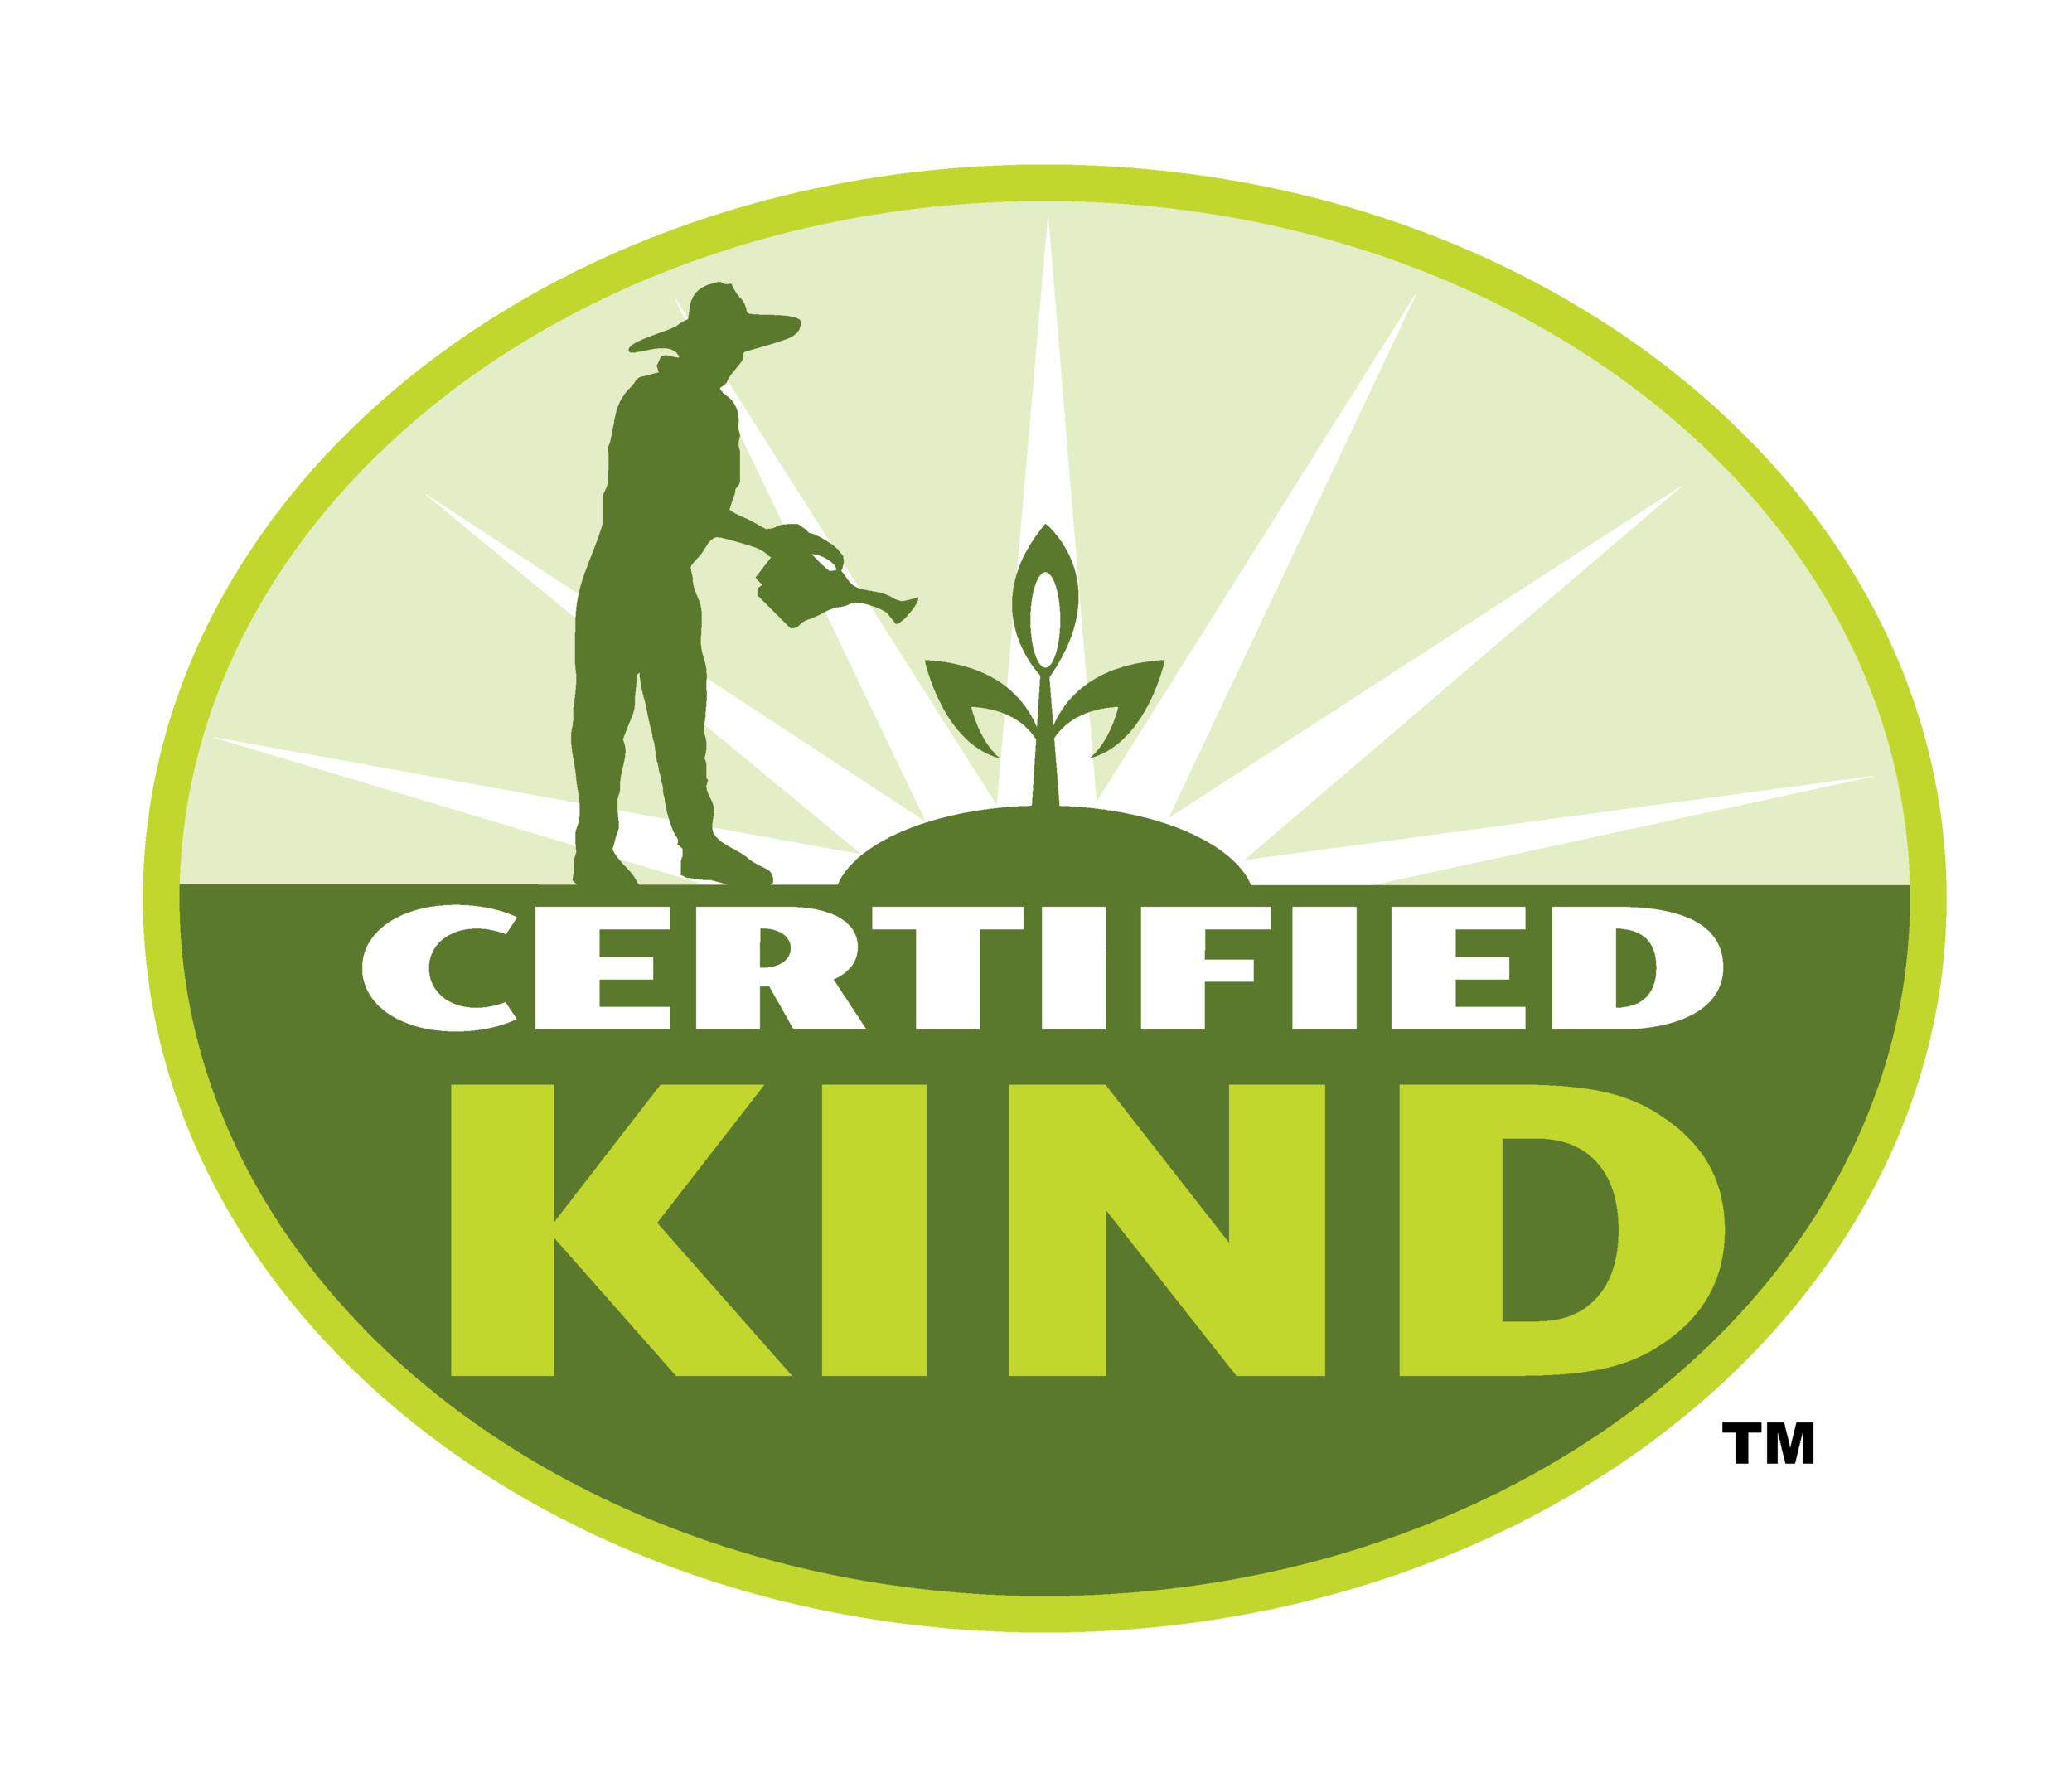 Certification for Organically Grown Cannabis